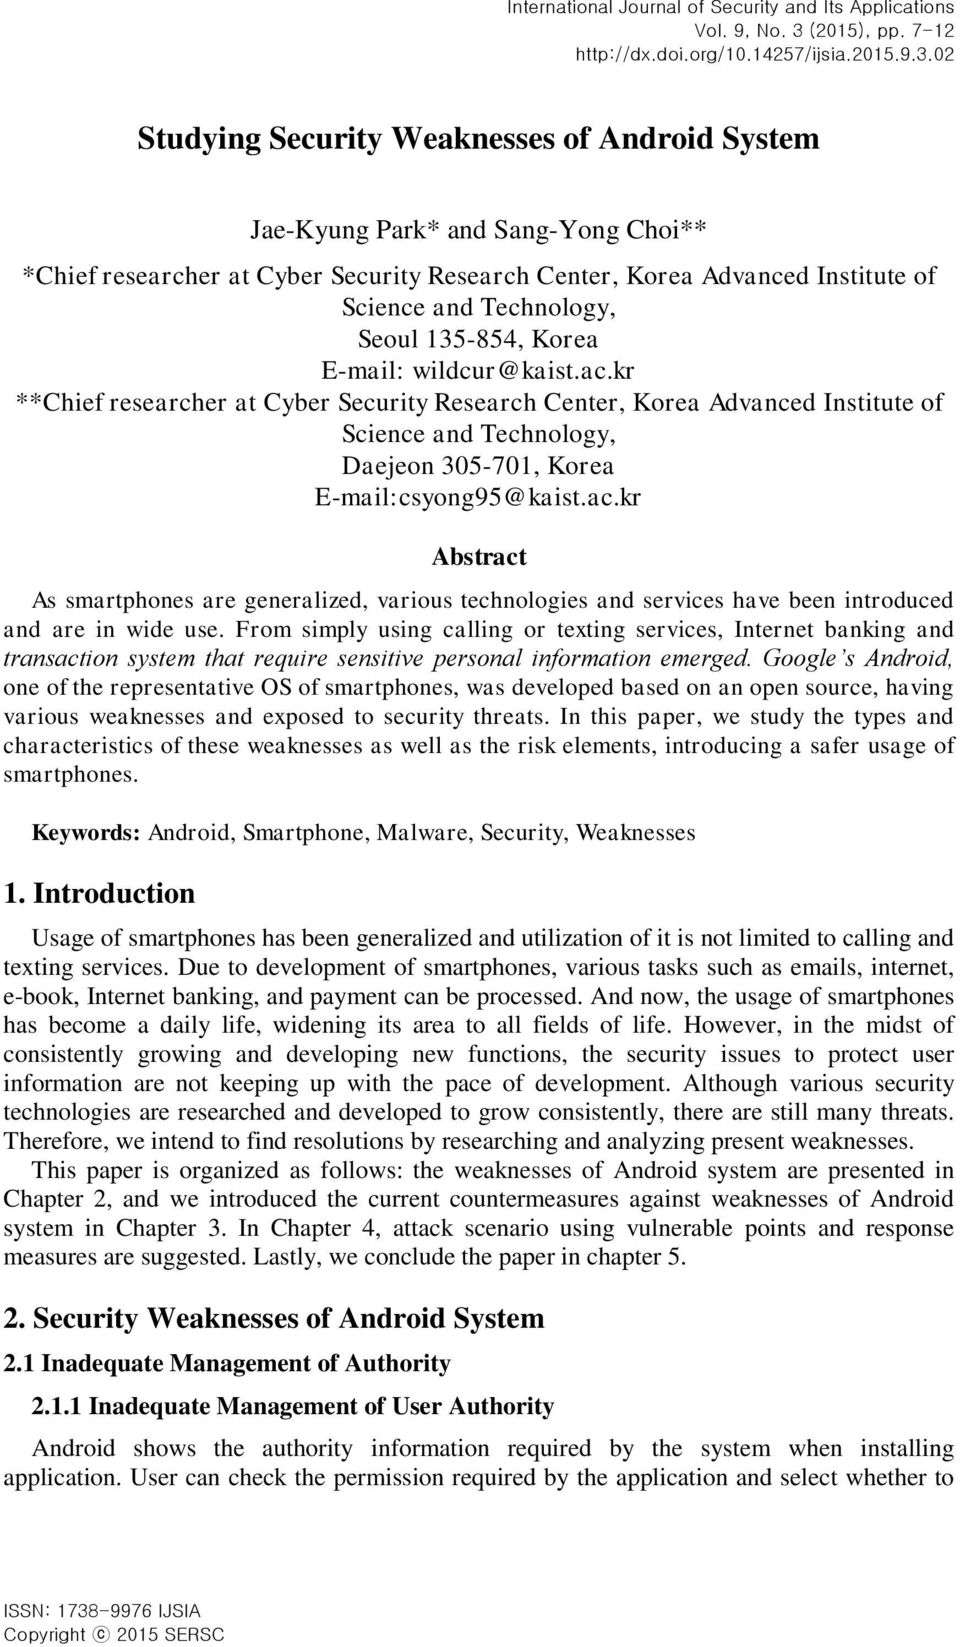 135-854, Korea E-mail: wildcur@kaist.ac.kr **Chief researcher at Cyber Security Research Center, Korea Advanced Institute of Science and Technology, Daejeon 305-701, Korea E-mail:csyong95@kaist.ac.kr Abstract As smartphones are generalized, various technologies and services have been introduced and are in wide use.